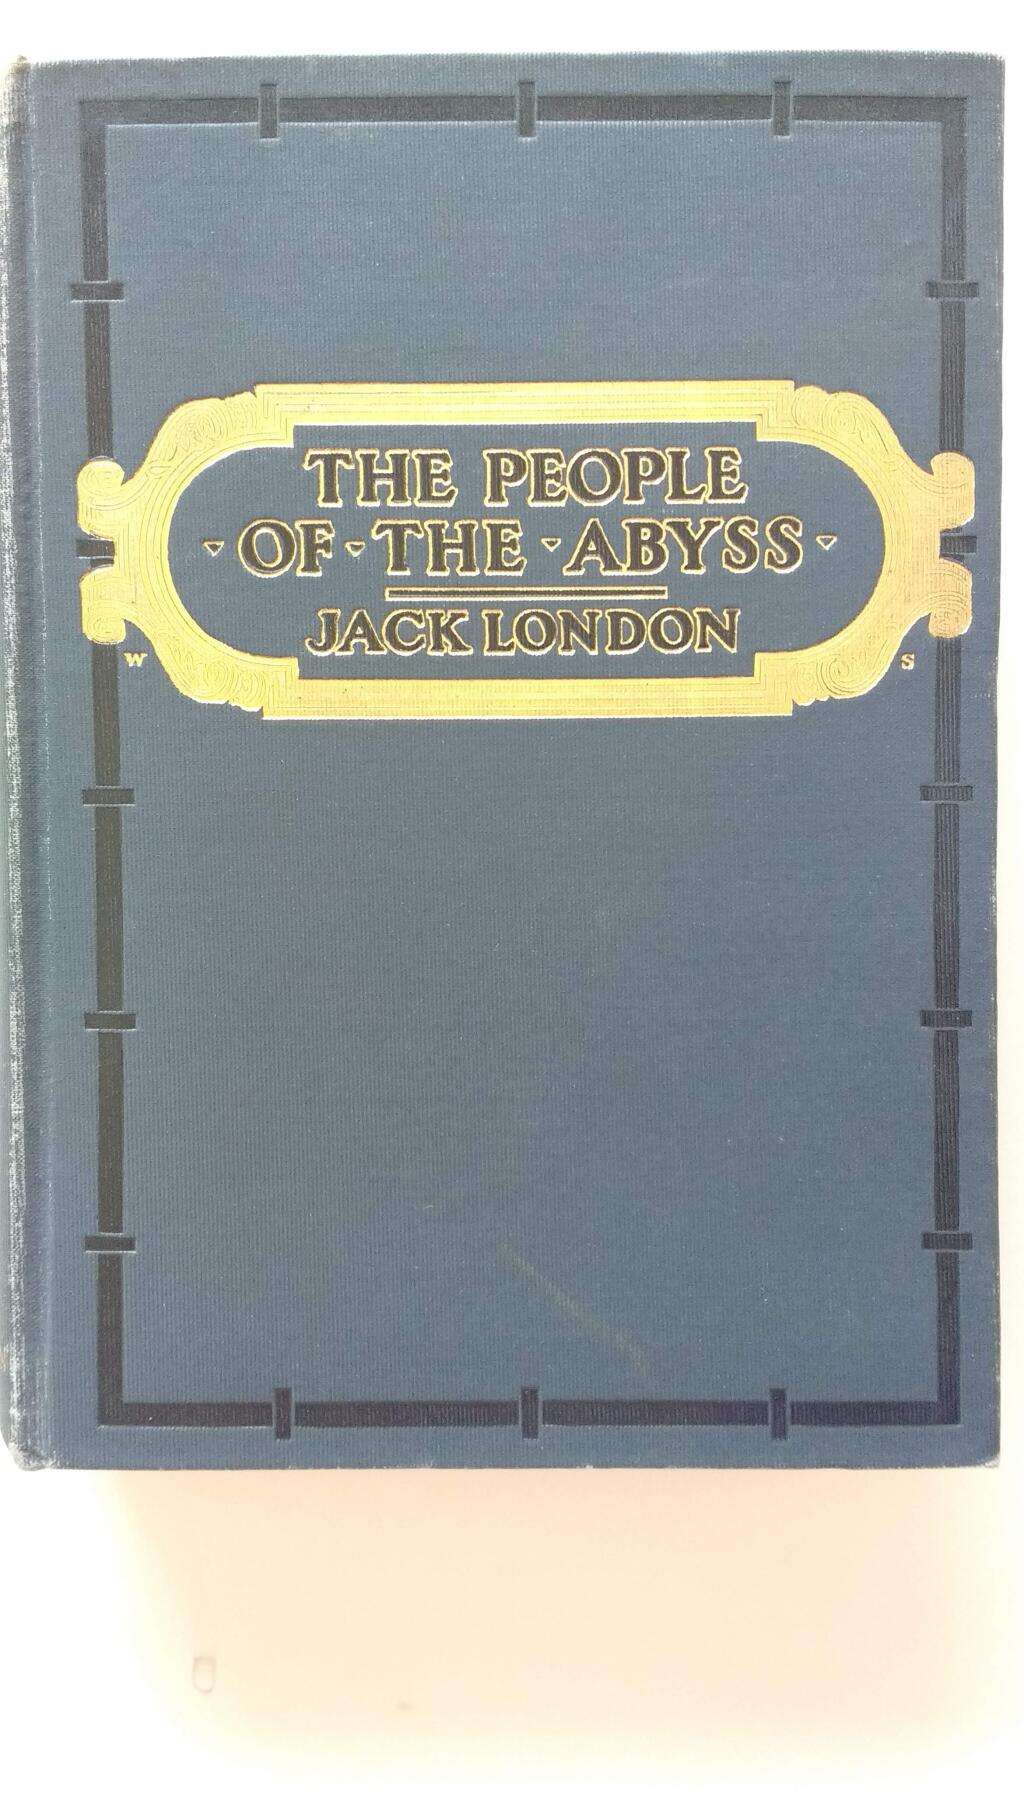 'The People of the Abyss,' by Jack London. Published in 1903.